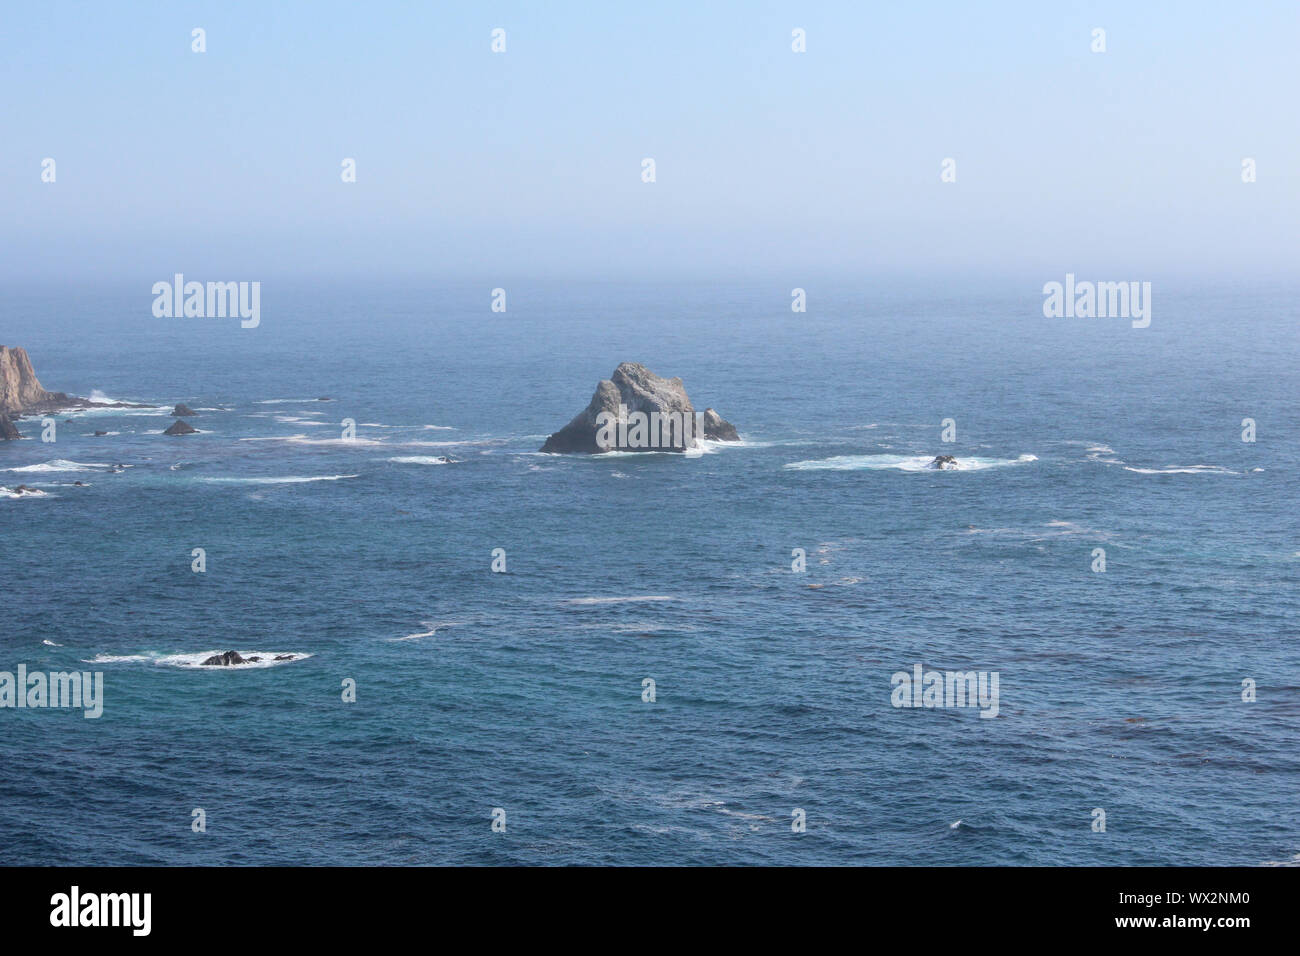 View of a small rock island in the Pacific Ocean close to Pacific Coast Highway, California, USA Stock Photo